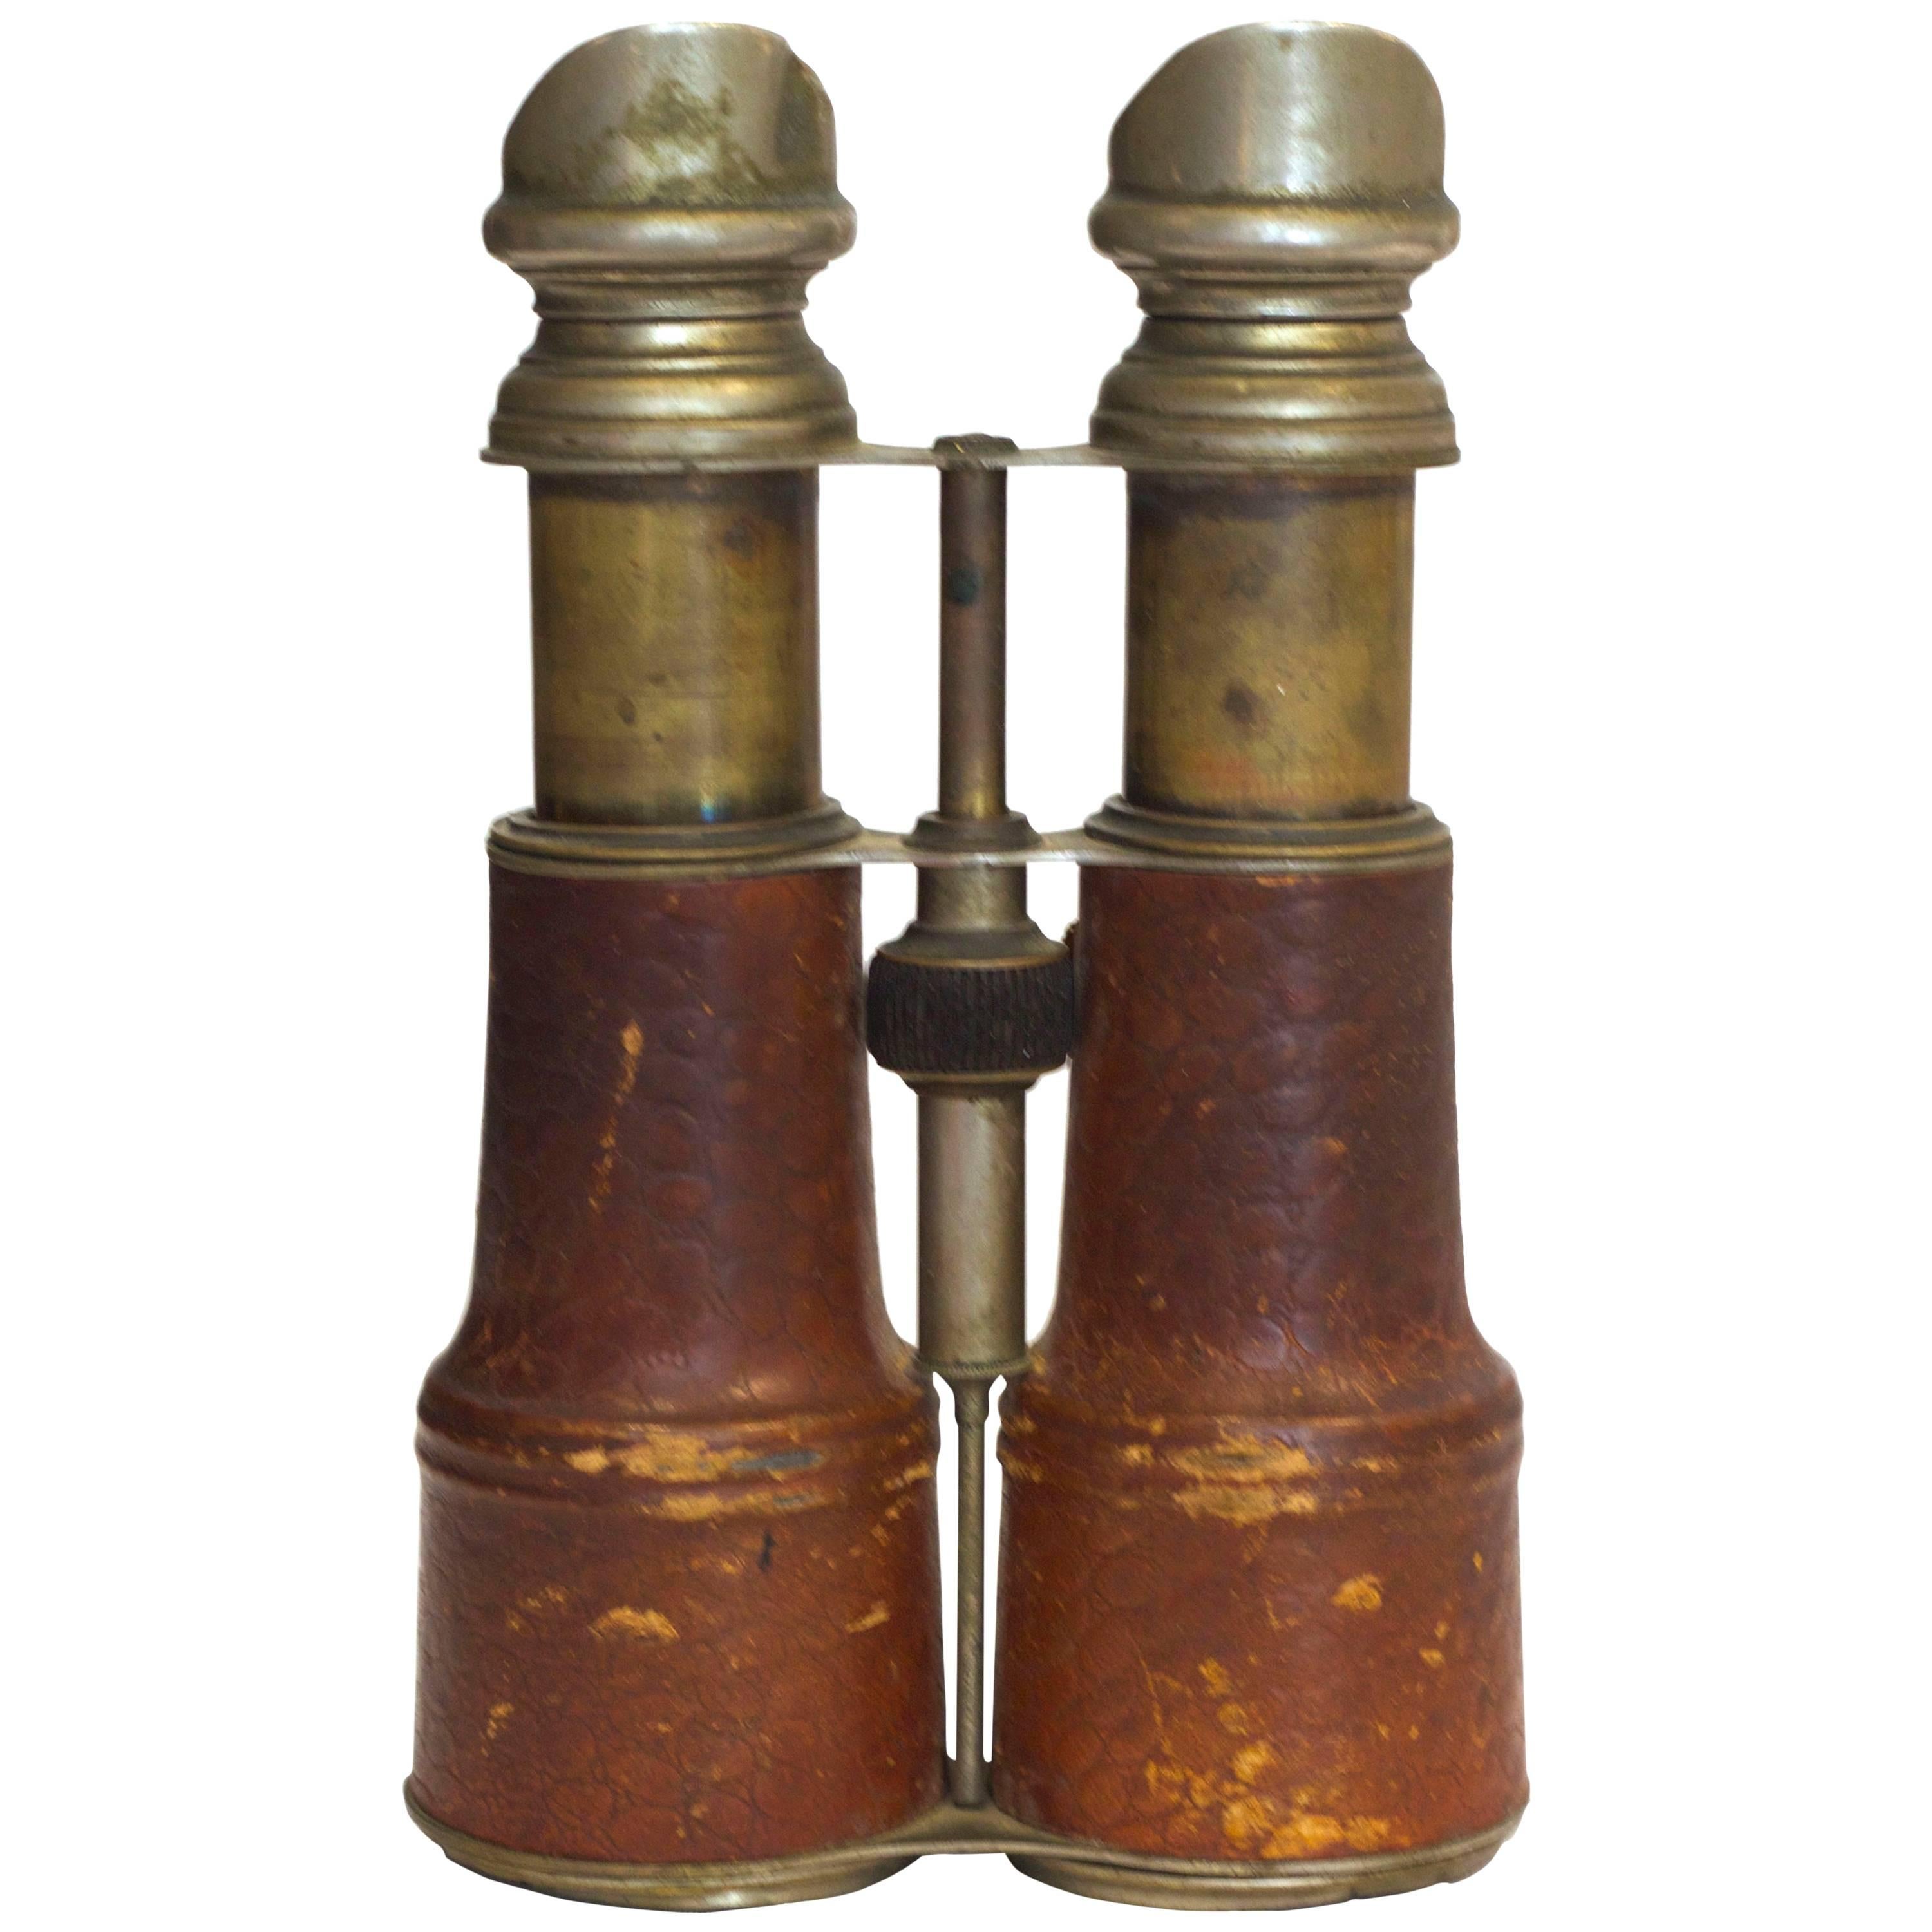 Early 20th c. Leather and Brass Binoculars